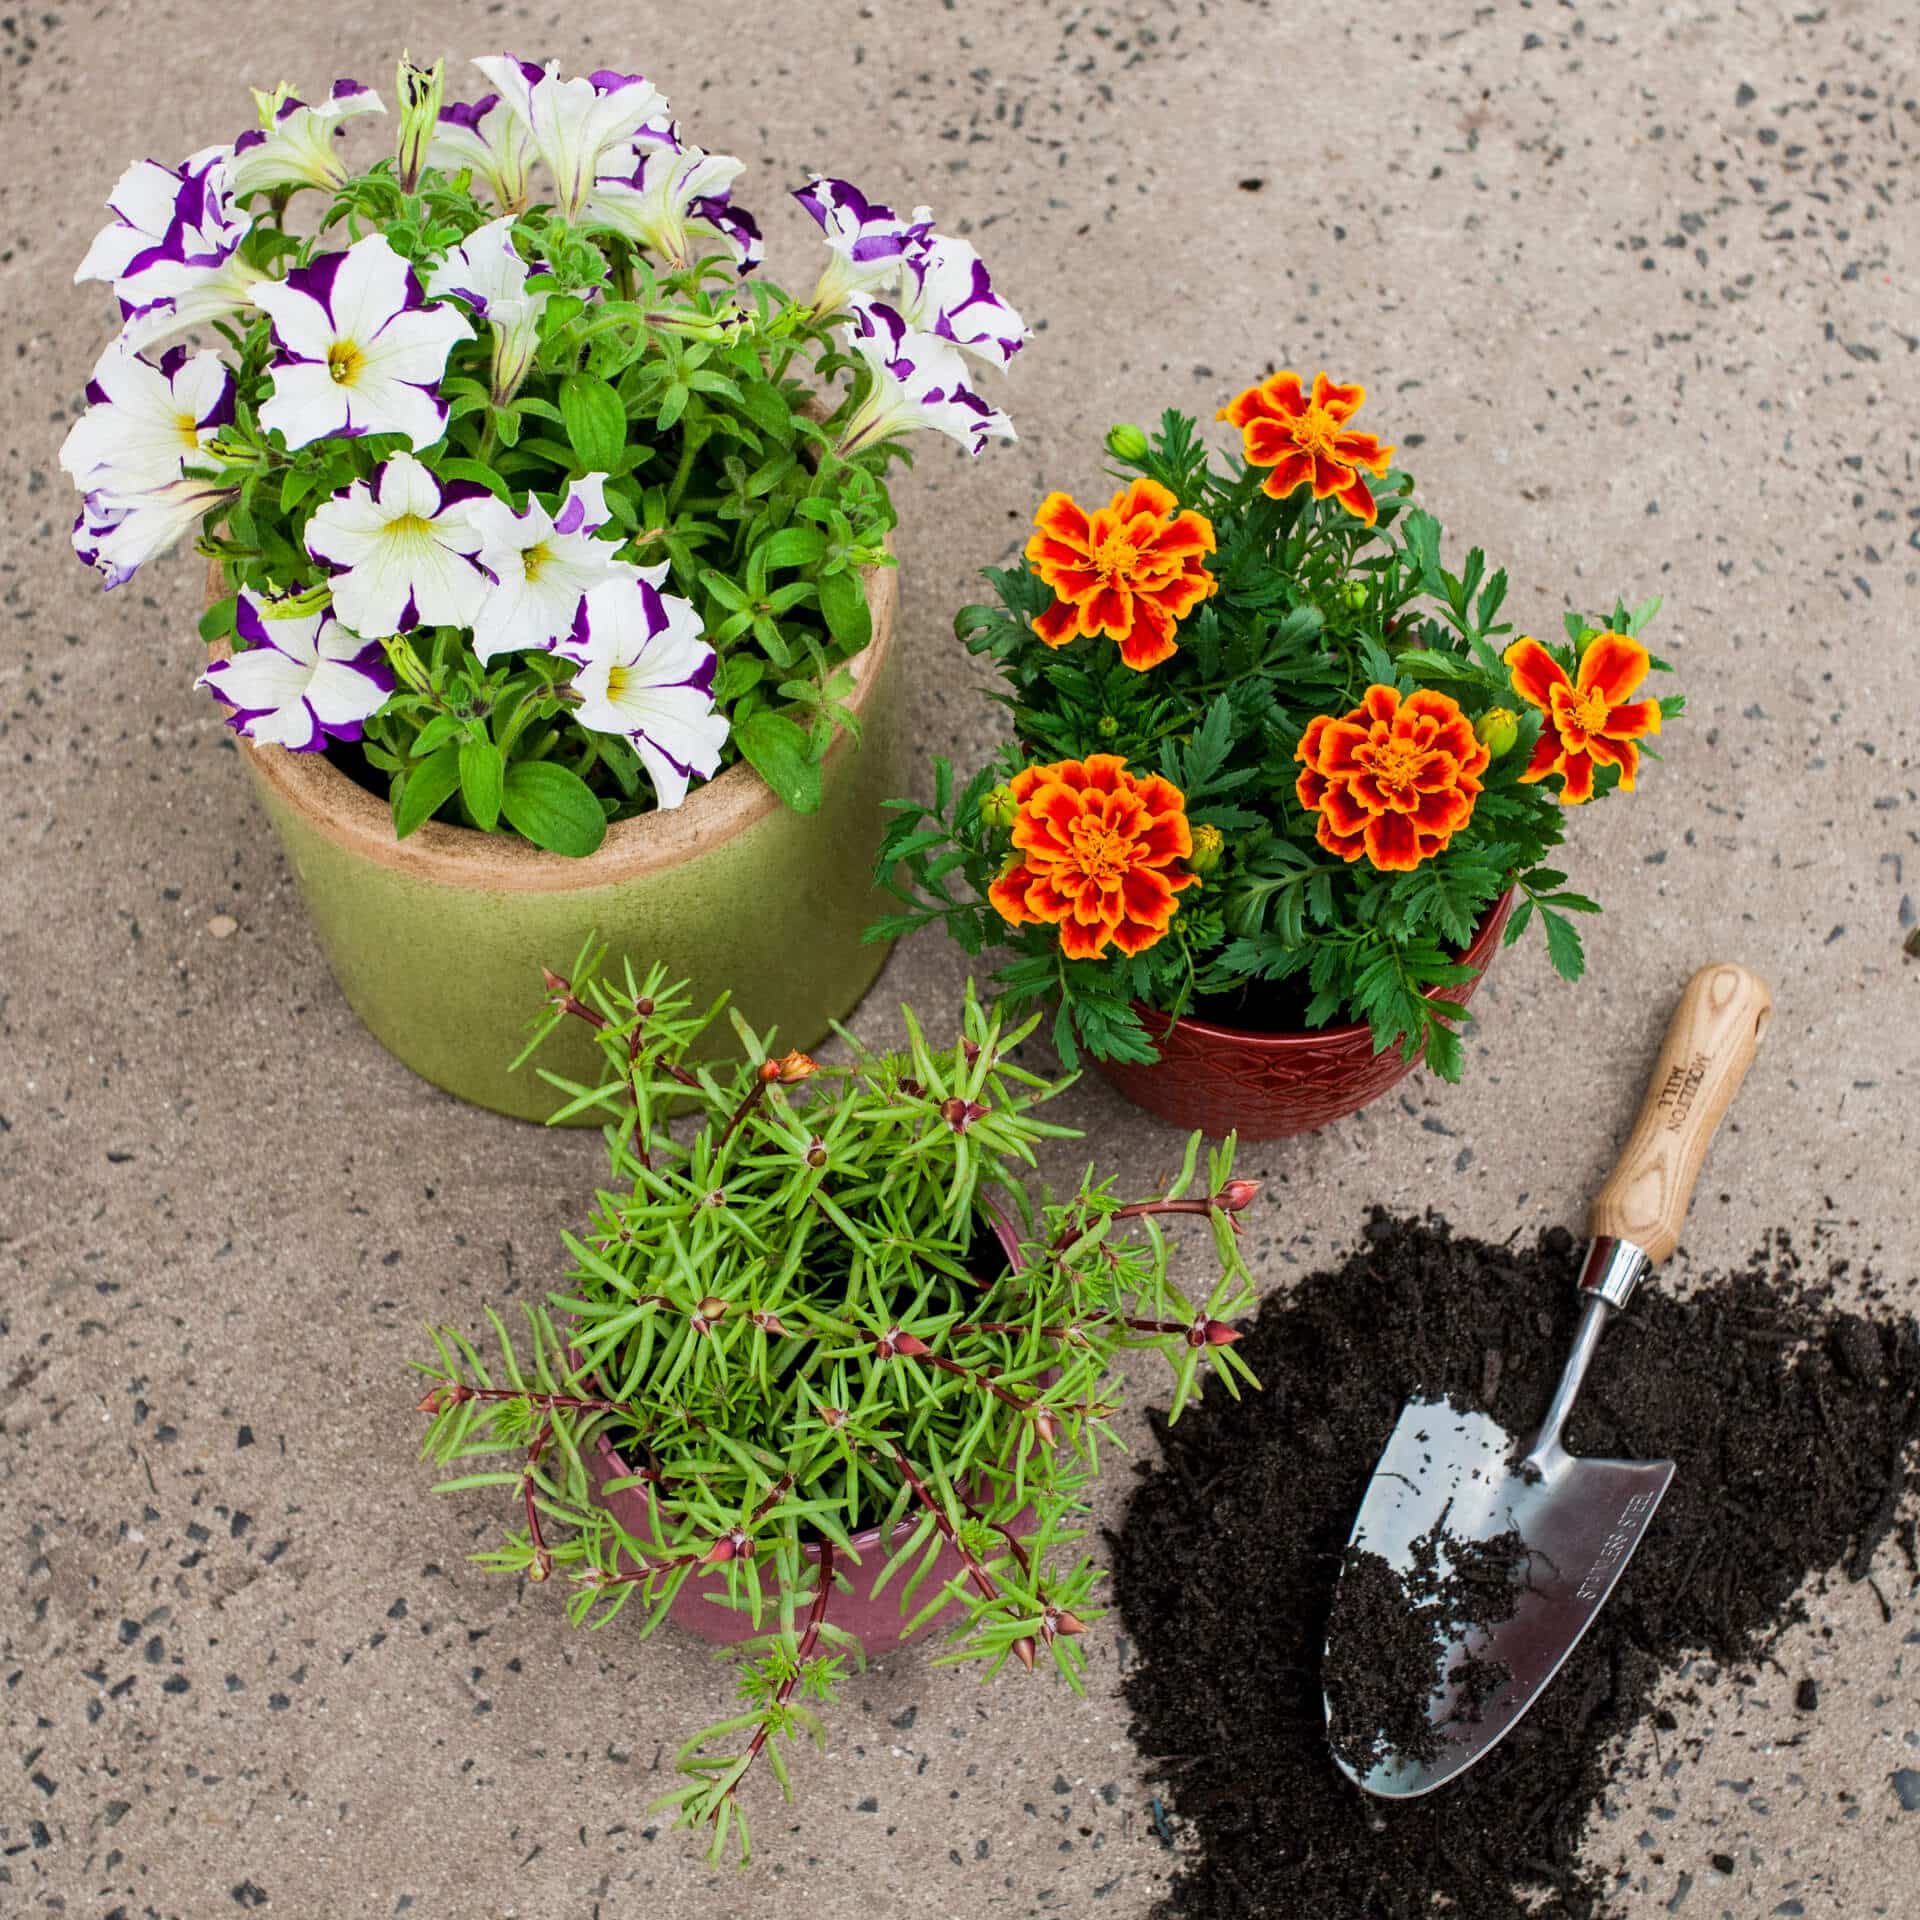 Colourful potted flowering plants alongside a gardening tool in soil on a concrete floor.